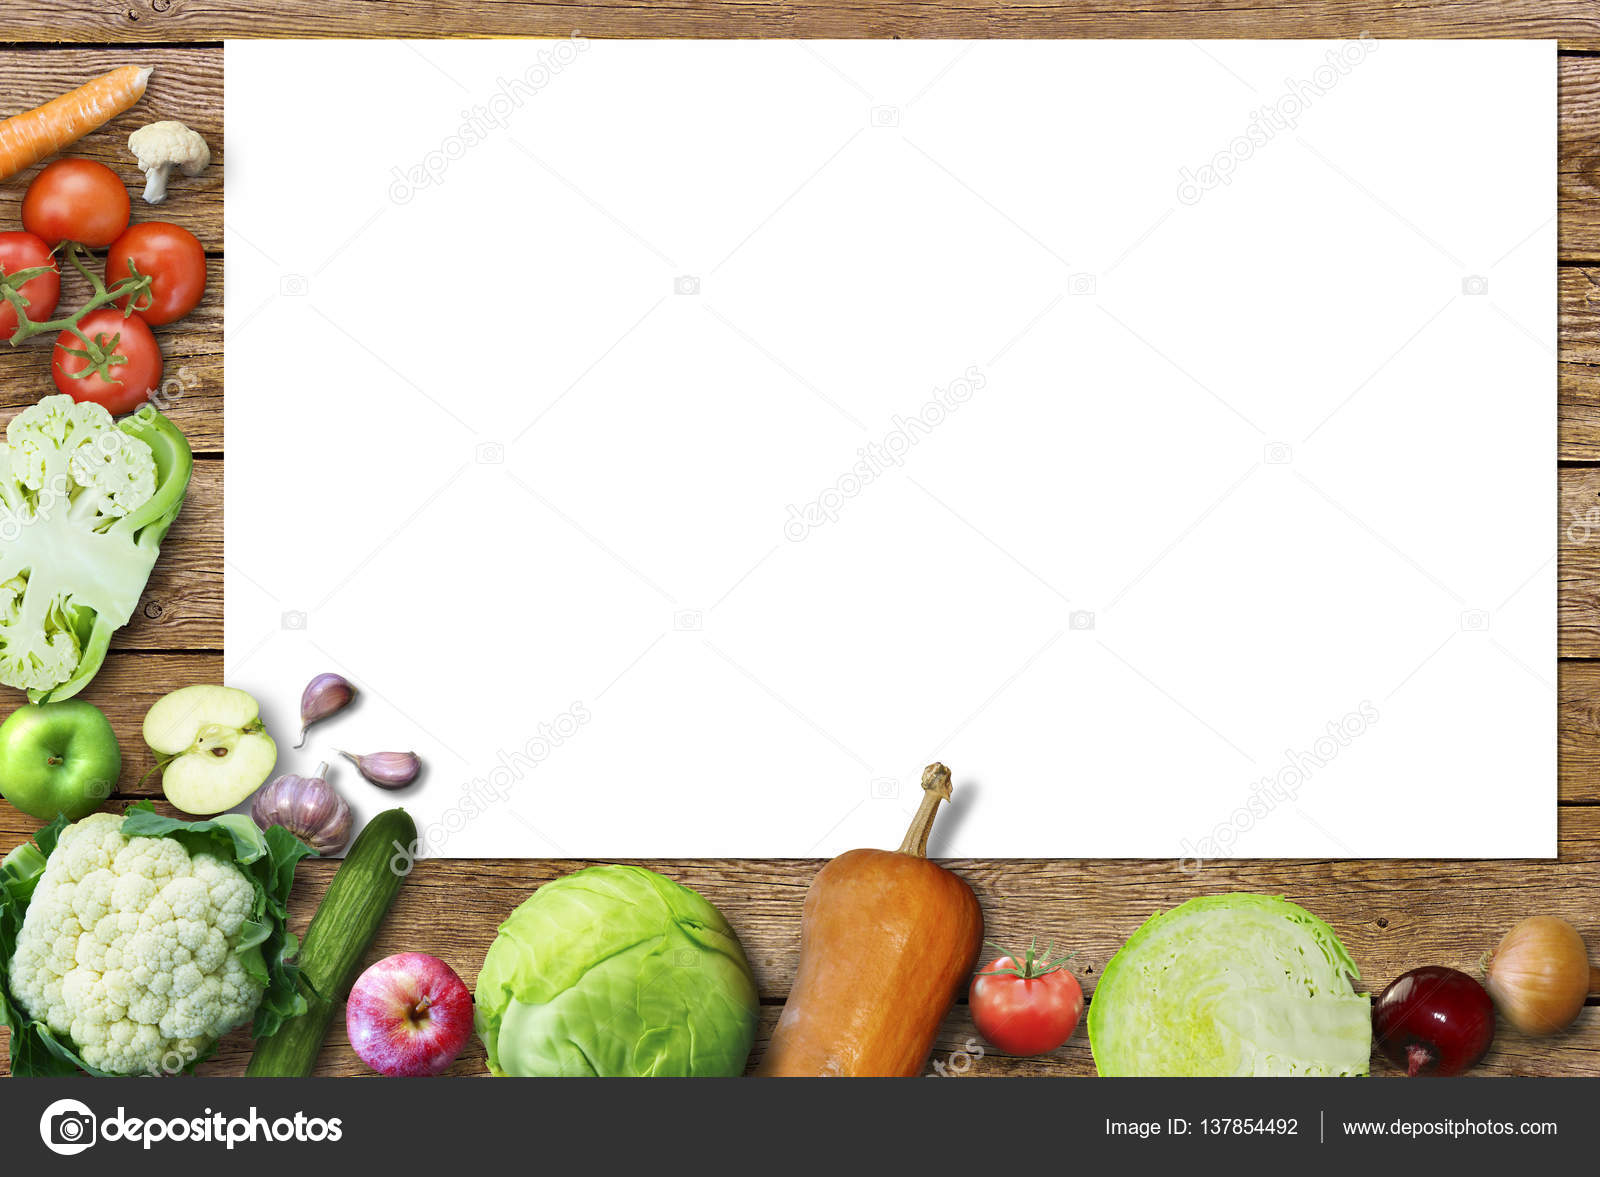 Organic Food Background Food Photography Different Vegetable on Gray  Marble Background Copy Space High Resolution Product Stock Image  Image  of health healthy 147937601